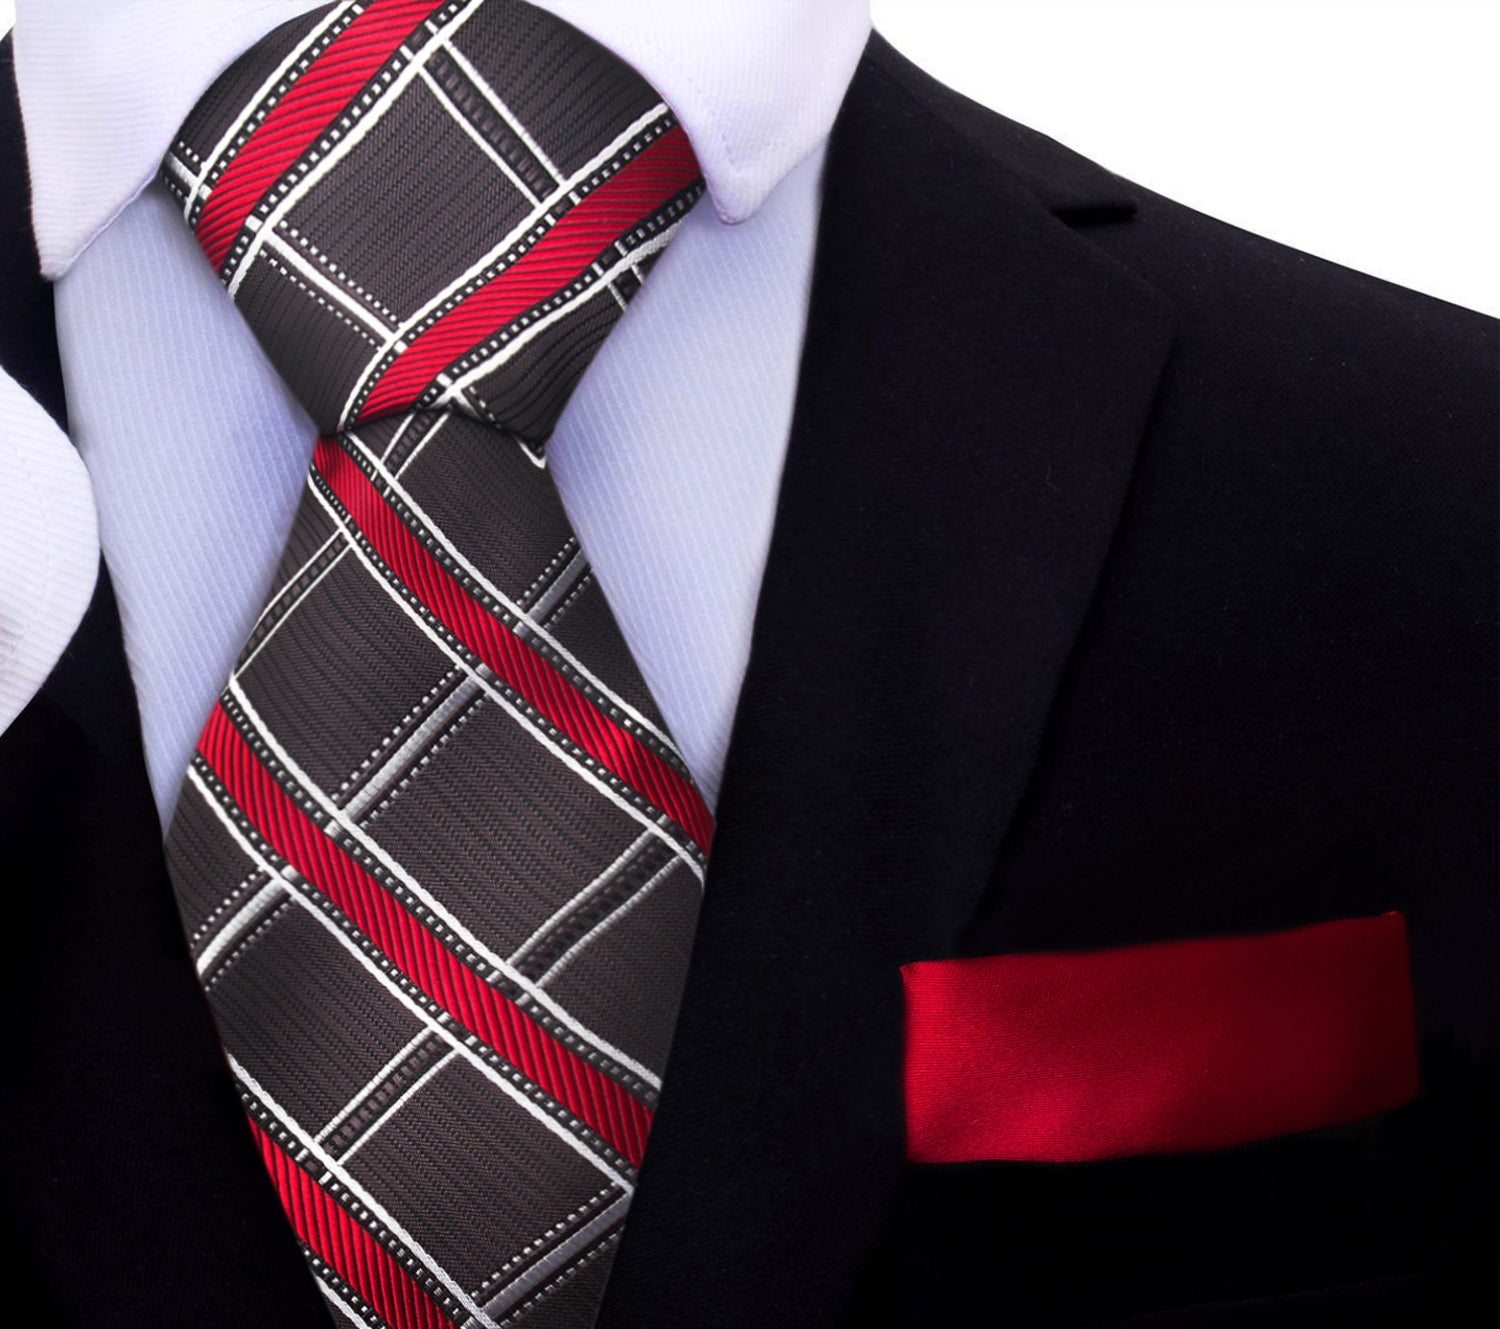 Greyish Brown, Red, White Plaid Tie and Red Square